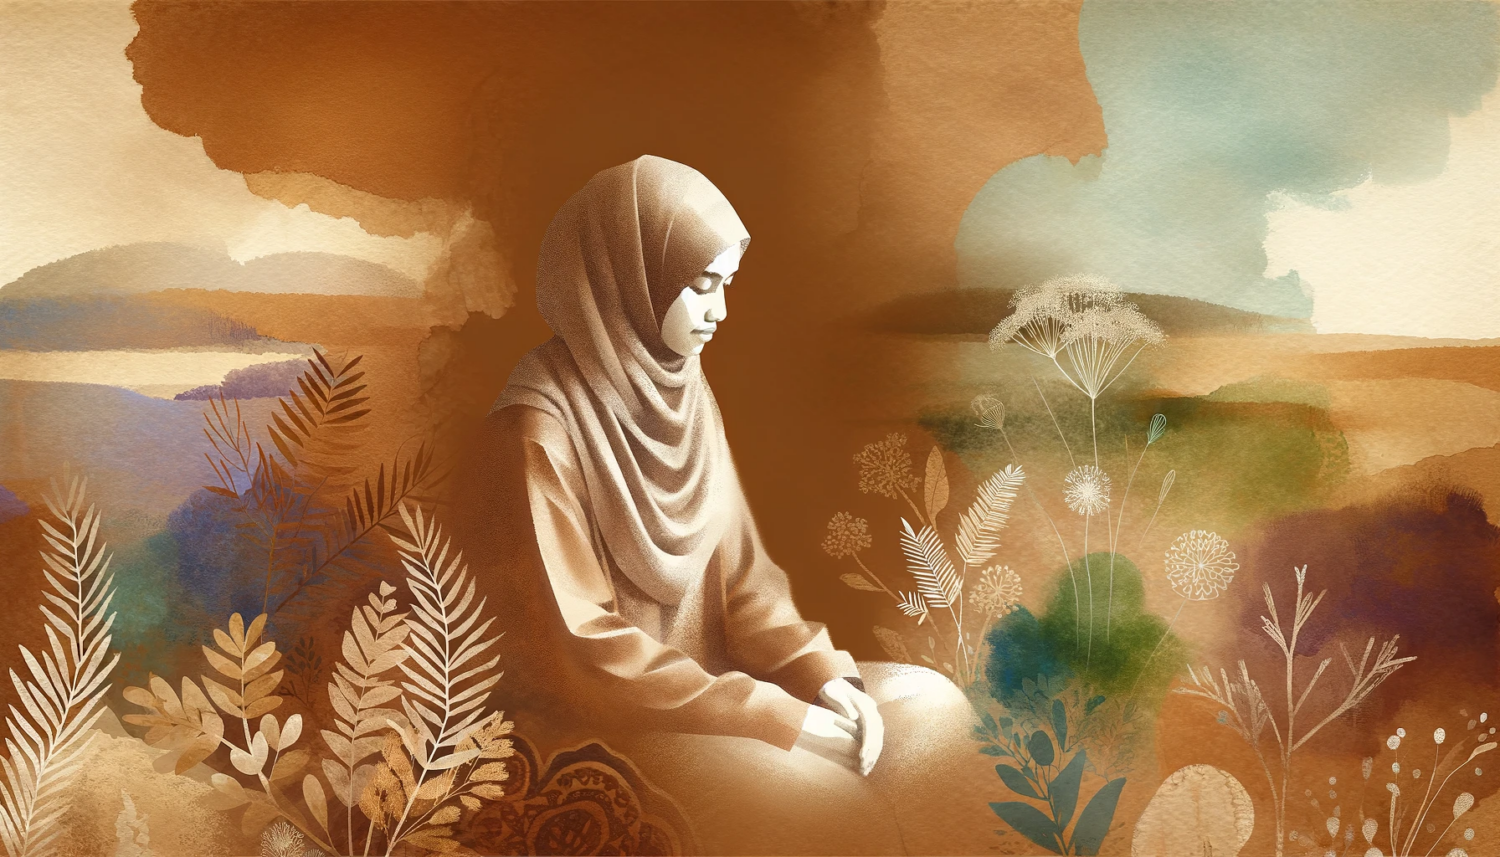 Design a banner-sized image of a woman experiencing emotional healing, imbued with an overall brownish hue. The woman, of Middle-Eastern descent, is depicted in a tranquil setting, symbolizing a journey of inner healing and growth. She is seated in a natural, serene environment, with soft, earthy tones of brown, tan, and hints of soft green around her. Her expression is one of peace and newfound strength, reflecting a sense of emotional liberation and balance. The background should be a blend of gentle natural elements, like trees and a calm sky, subtly colored in shades of brown and amber, enhancing the theme of healing and tranquility. The overall atmosphere should convey a feeling of comfort, safety, and emotional rejuvenation.